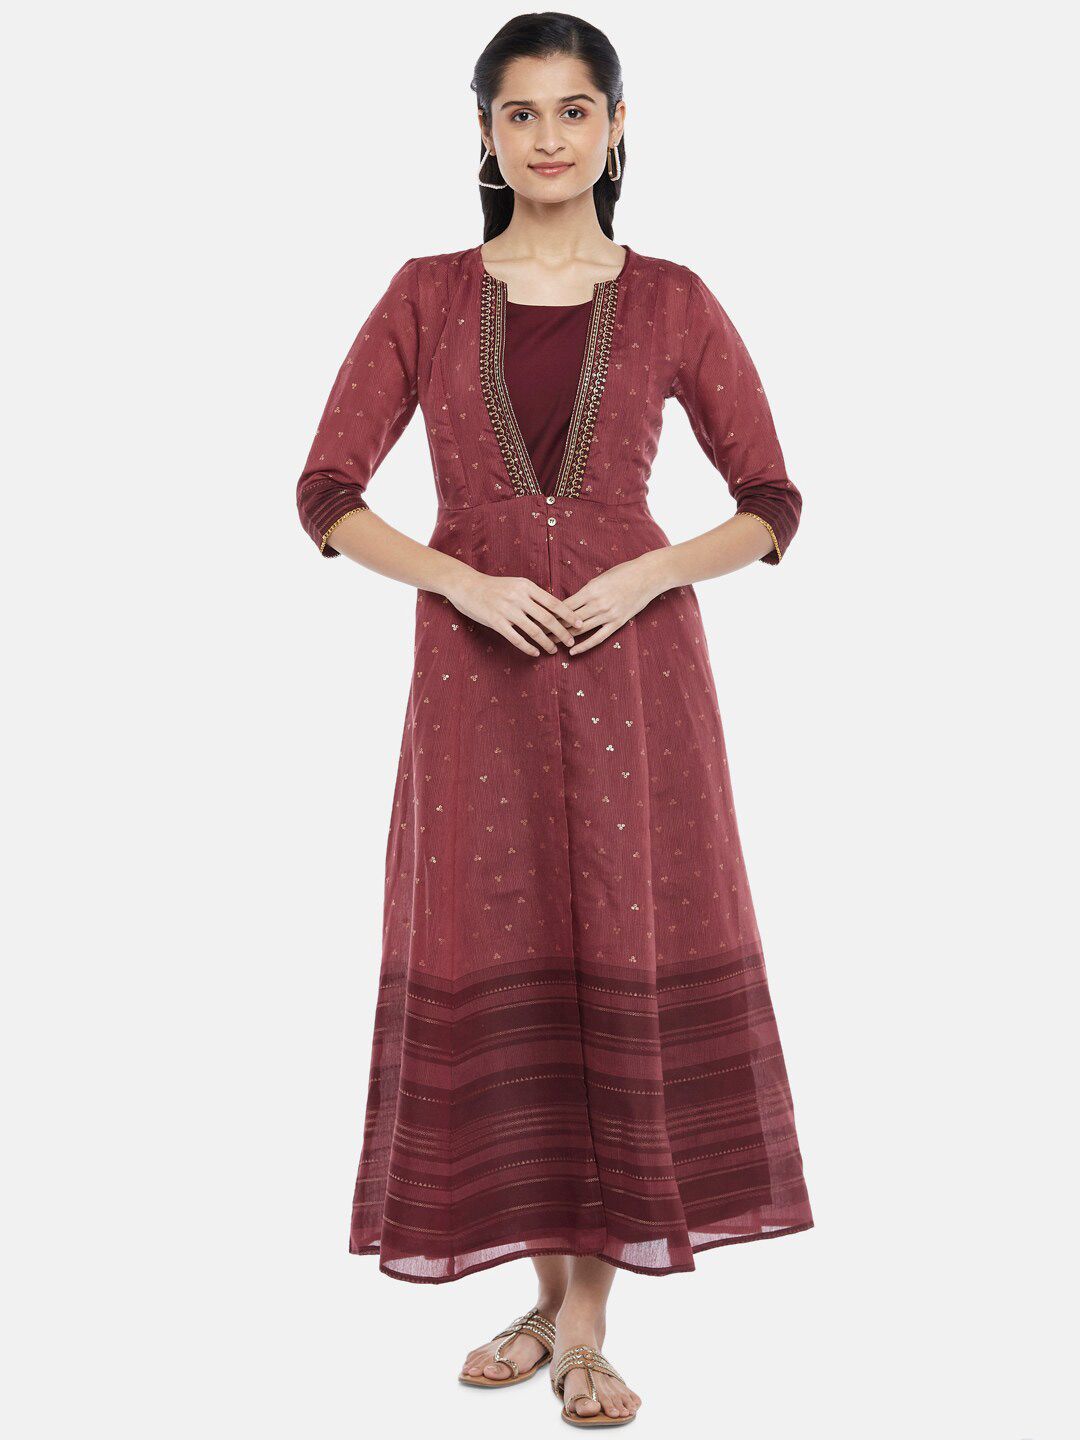 RANGMANCH BY PANTALOONS Women Maroon Ethnic Motifs A-Line Maxi Dress Price in India